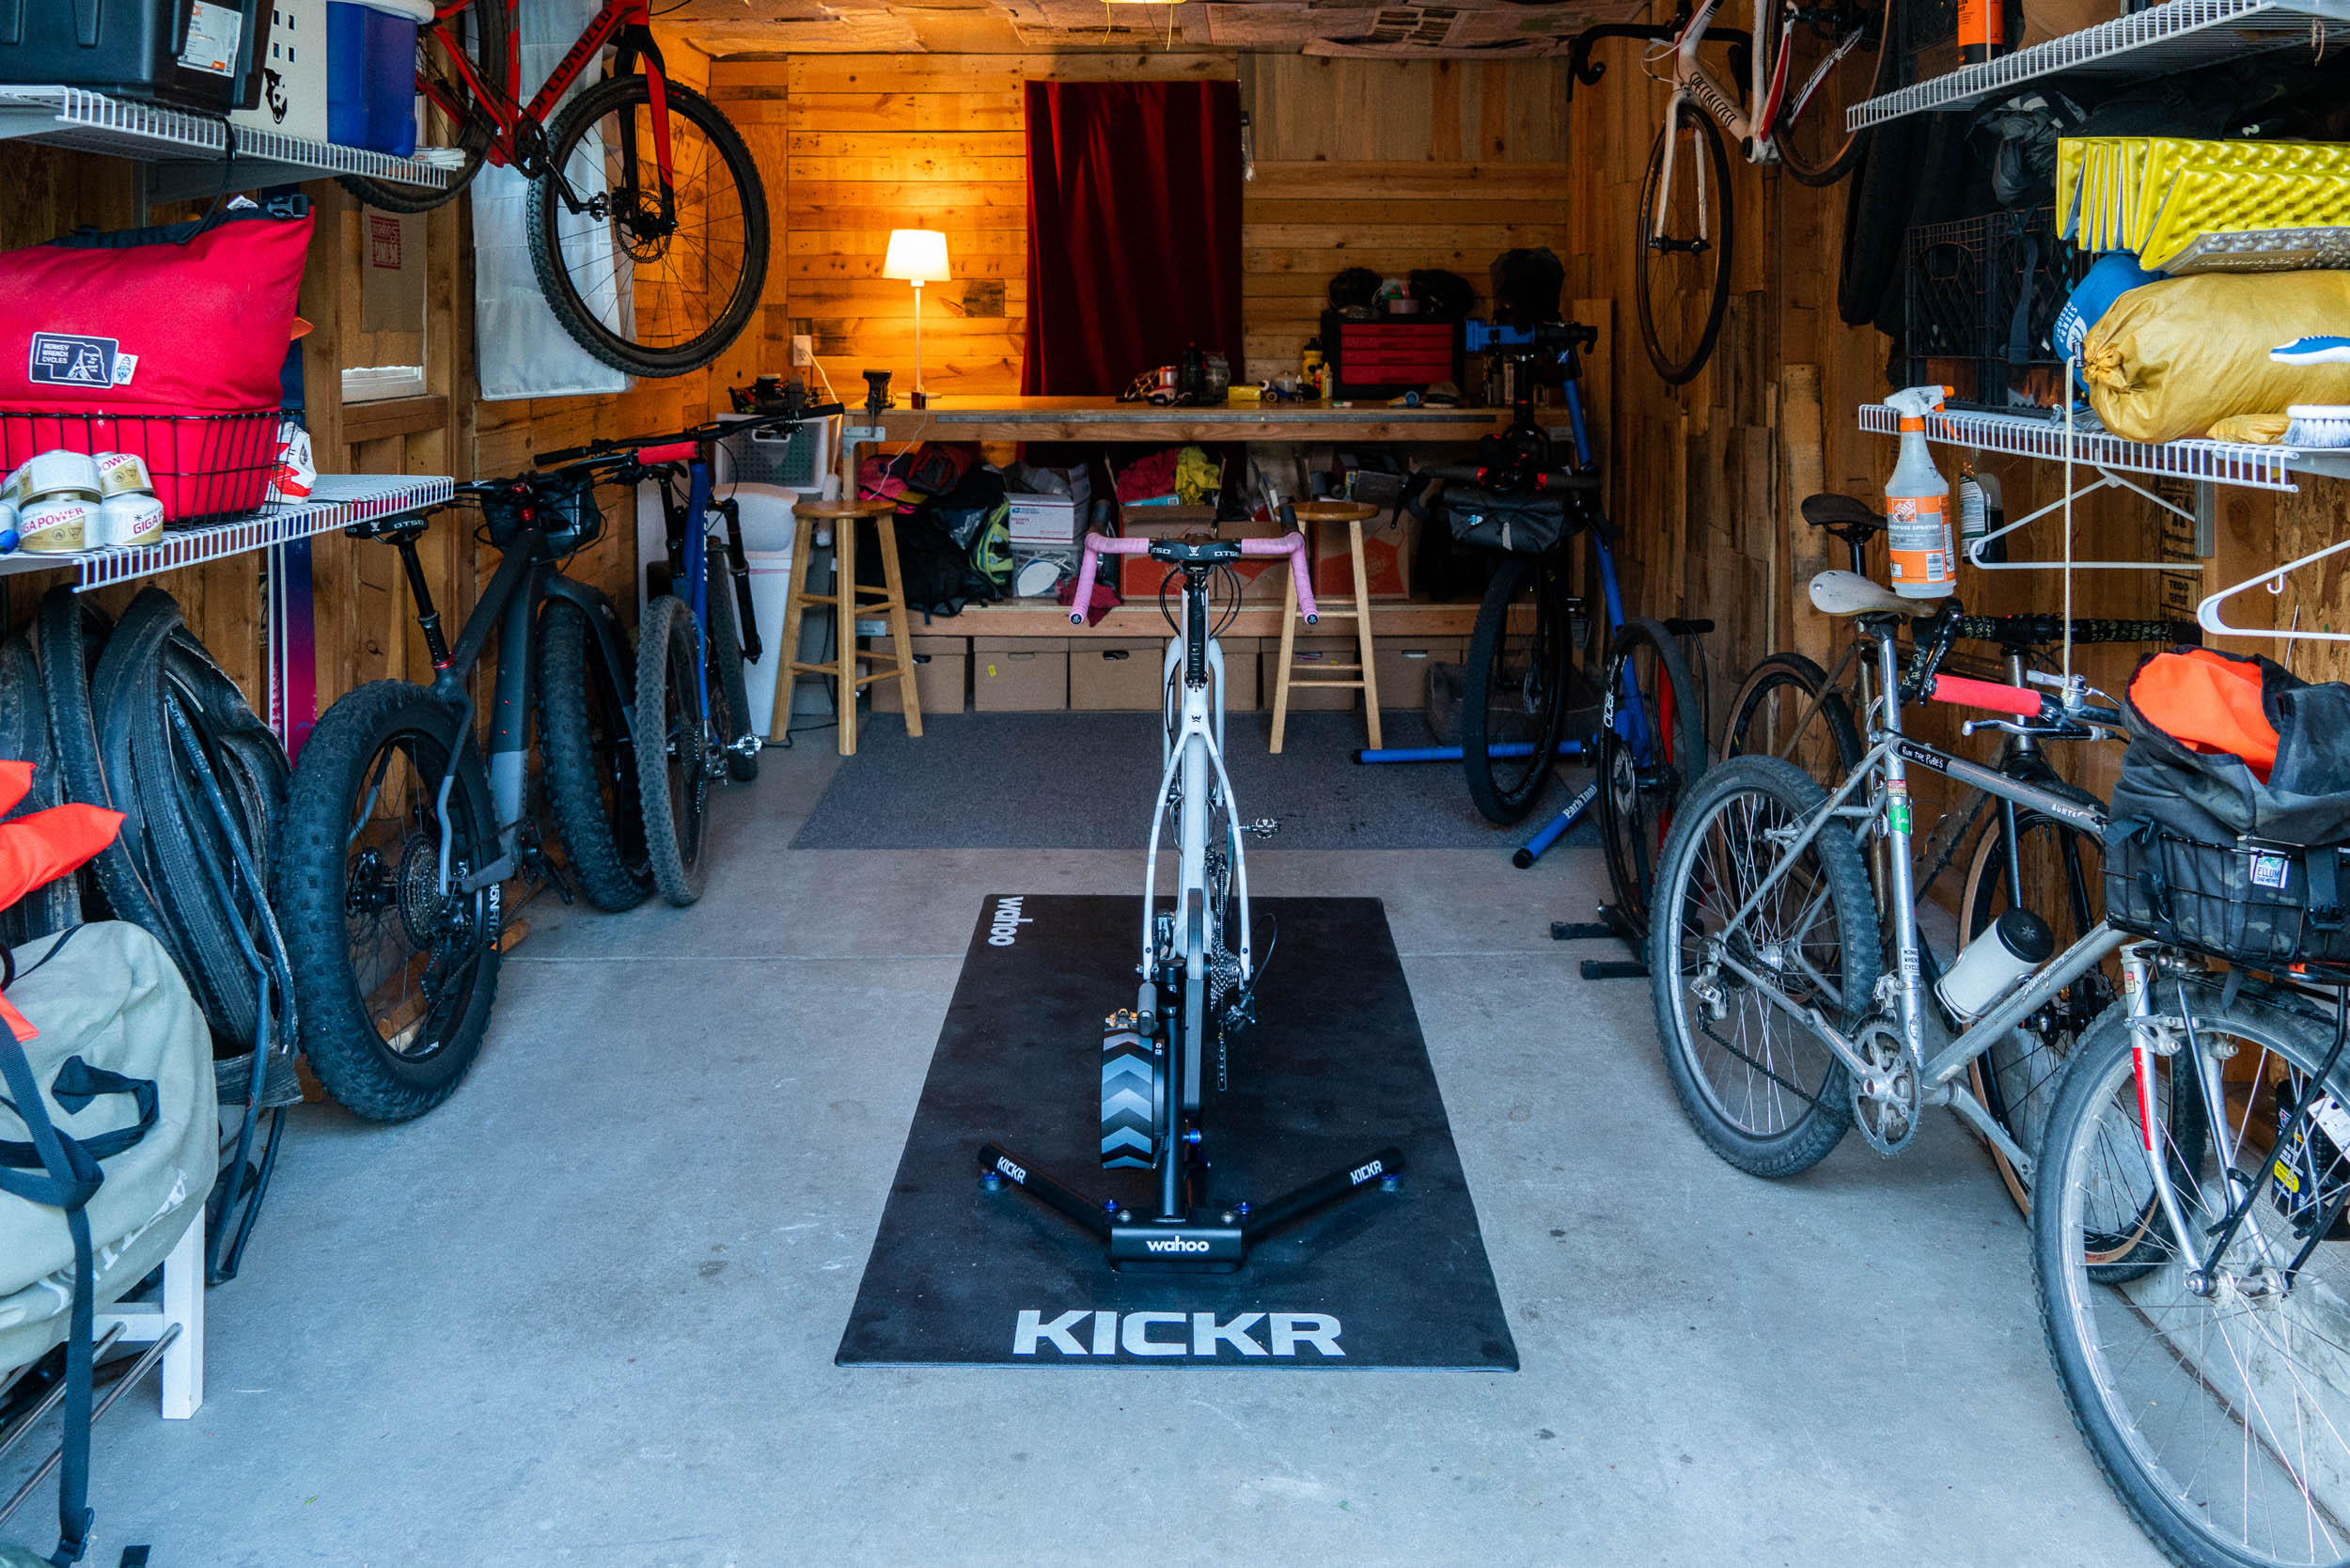 Wahoo Fitness Kickr Smart Trainer Review: Brings the Backroads Indoors